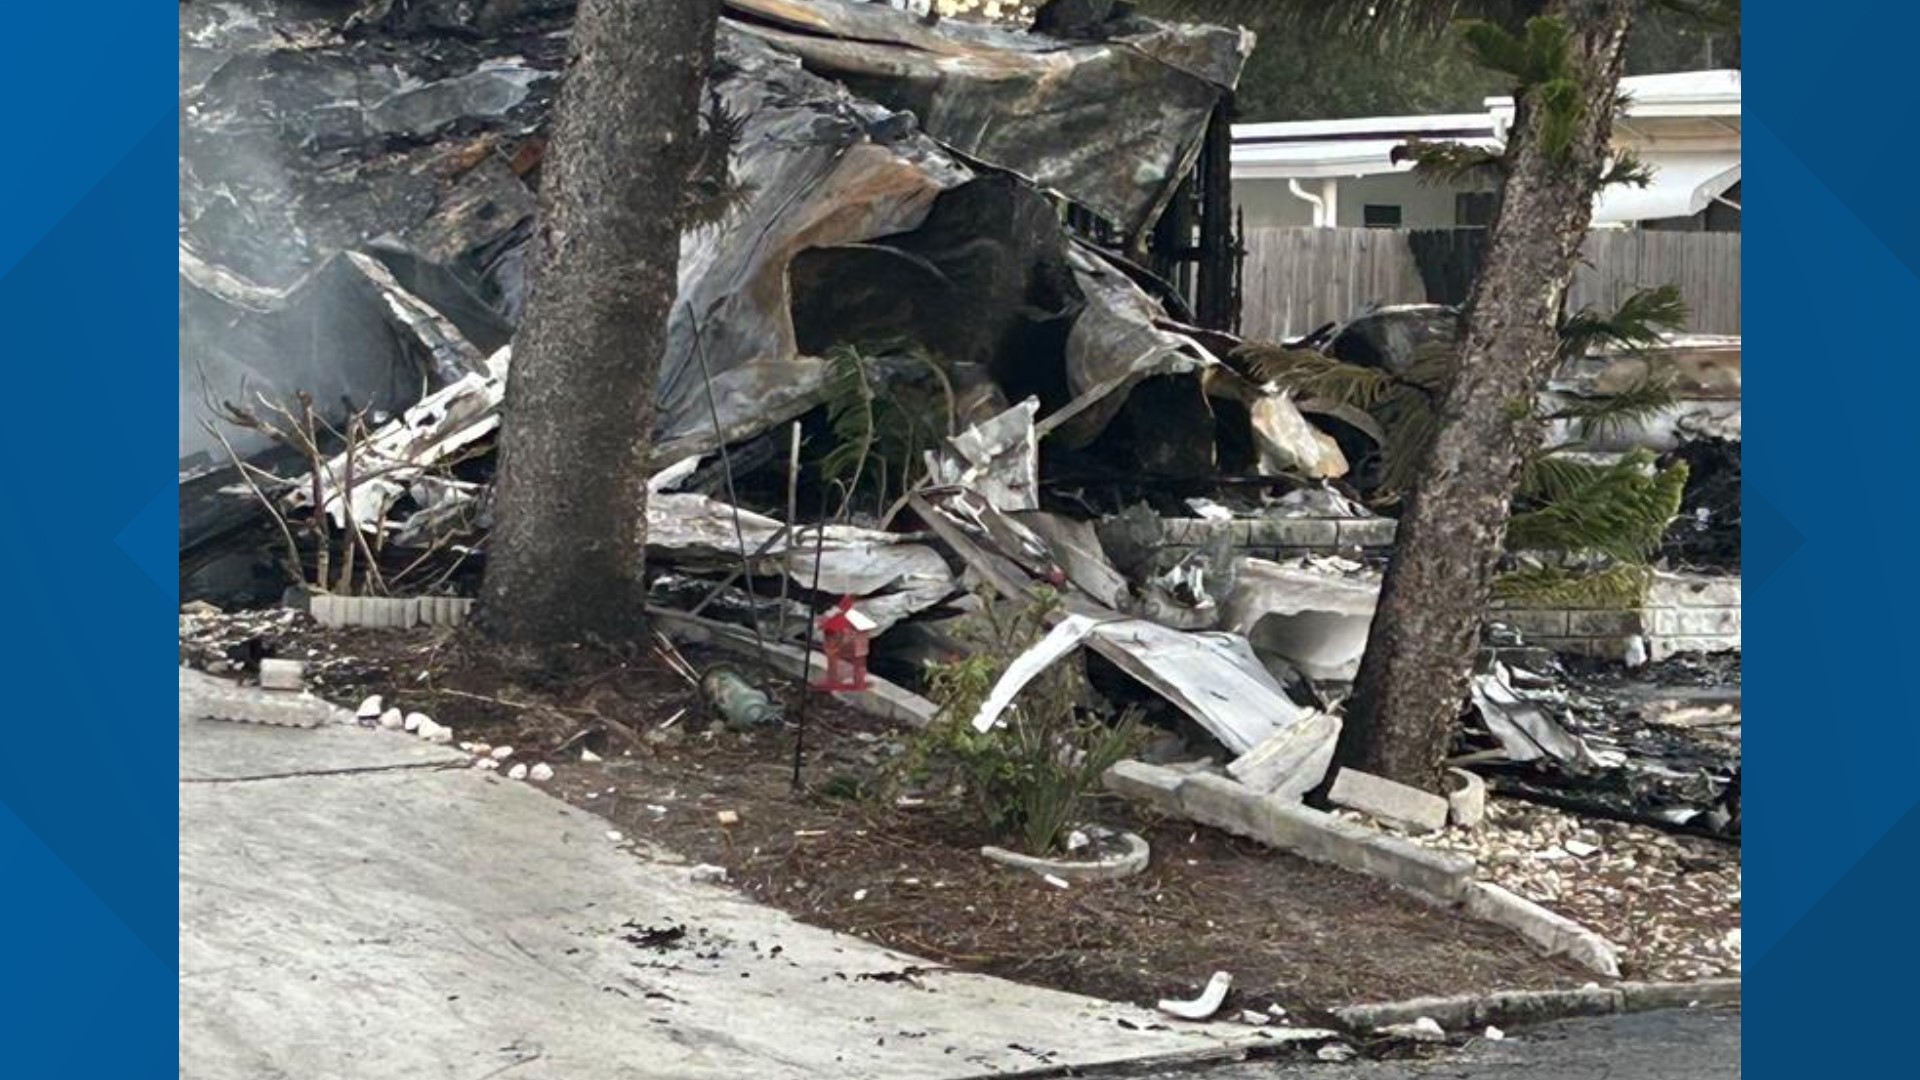 Three people died after a small plane crashed into a mobile home park in Clearwater.